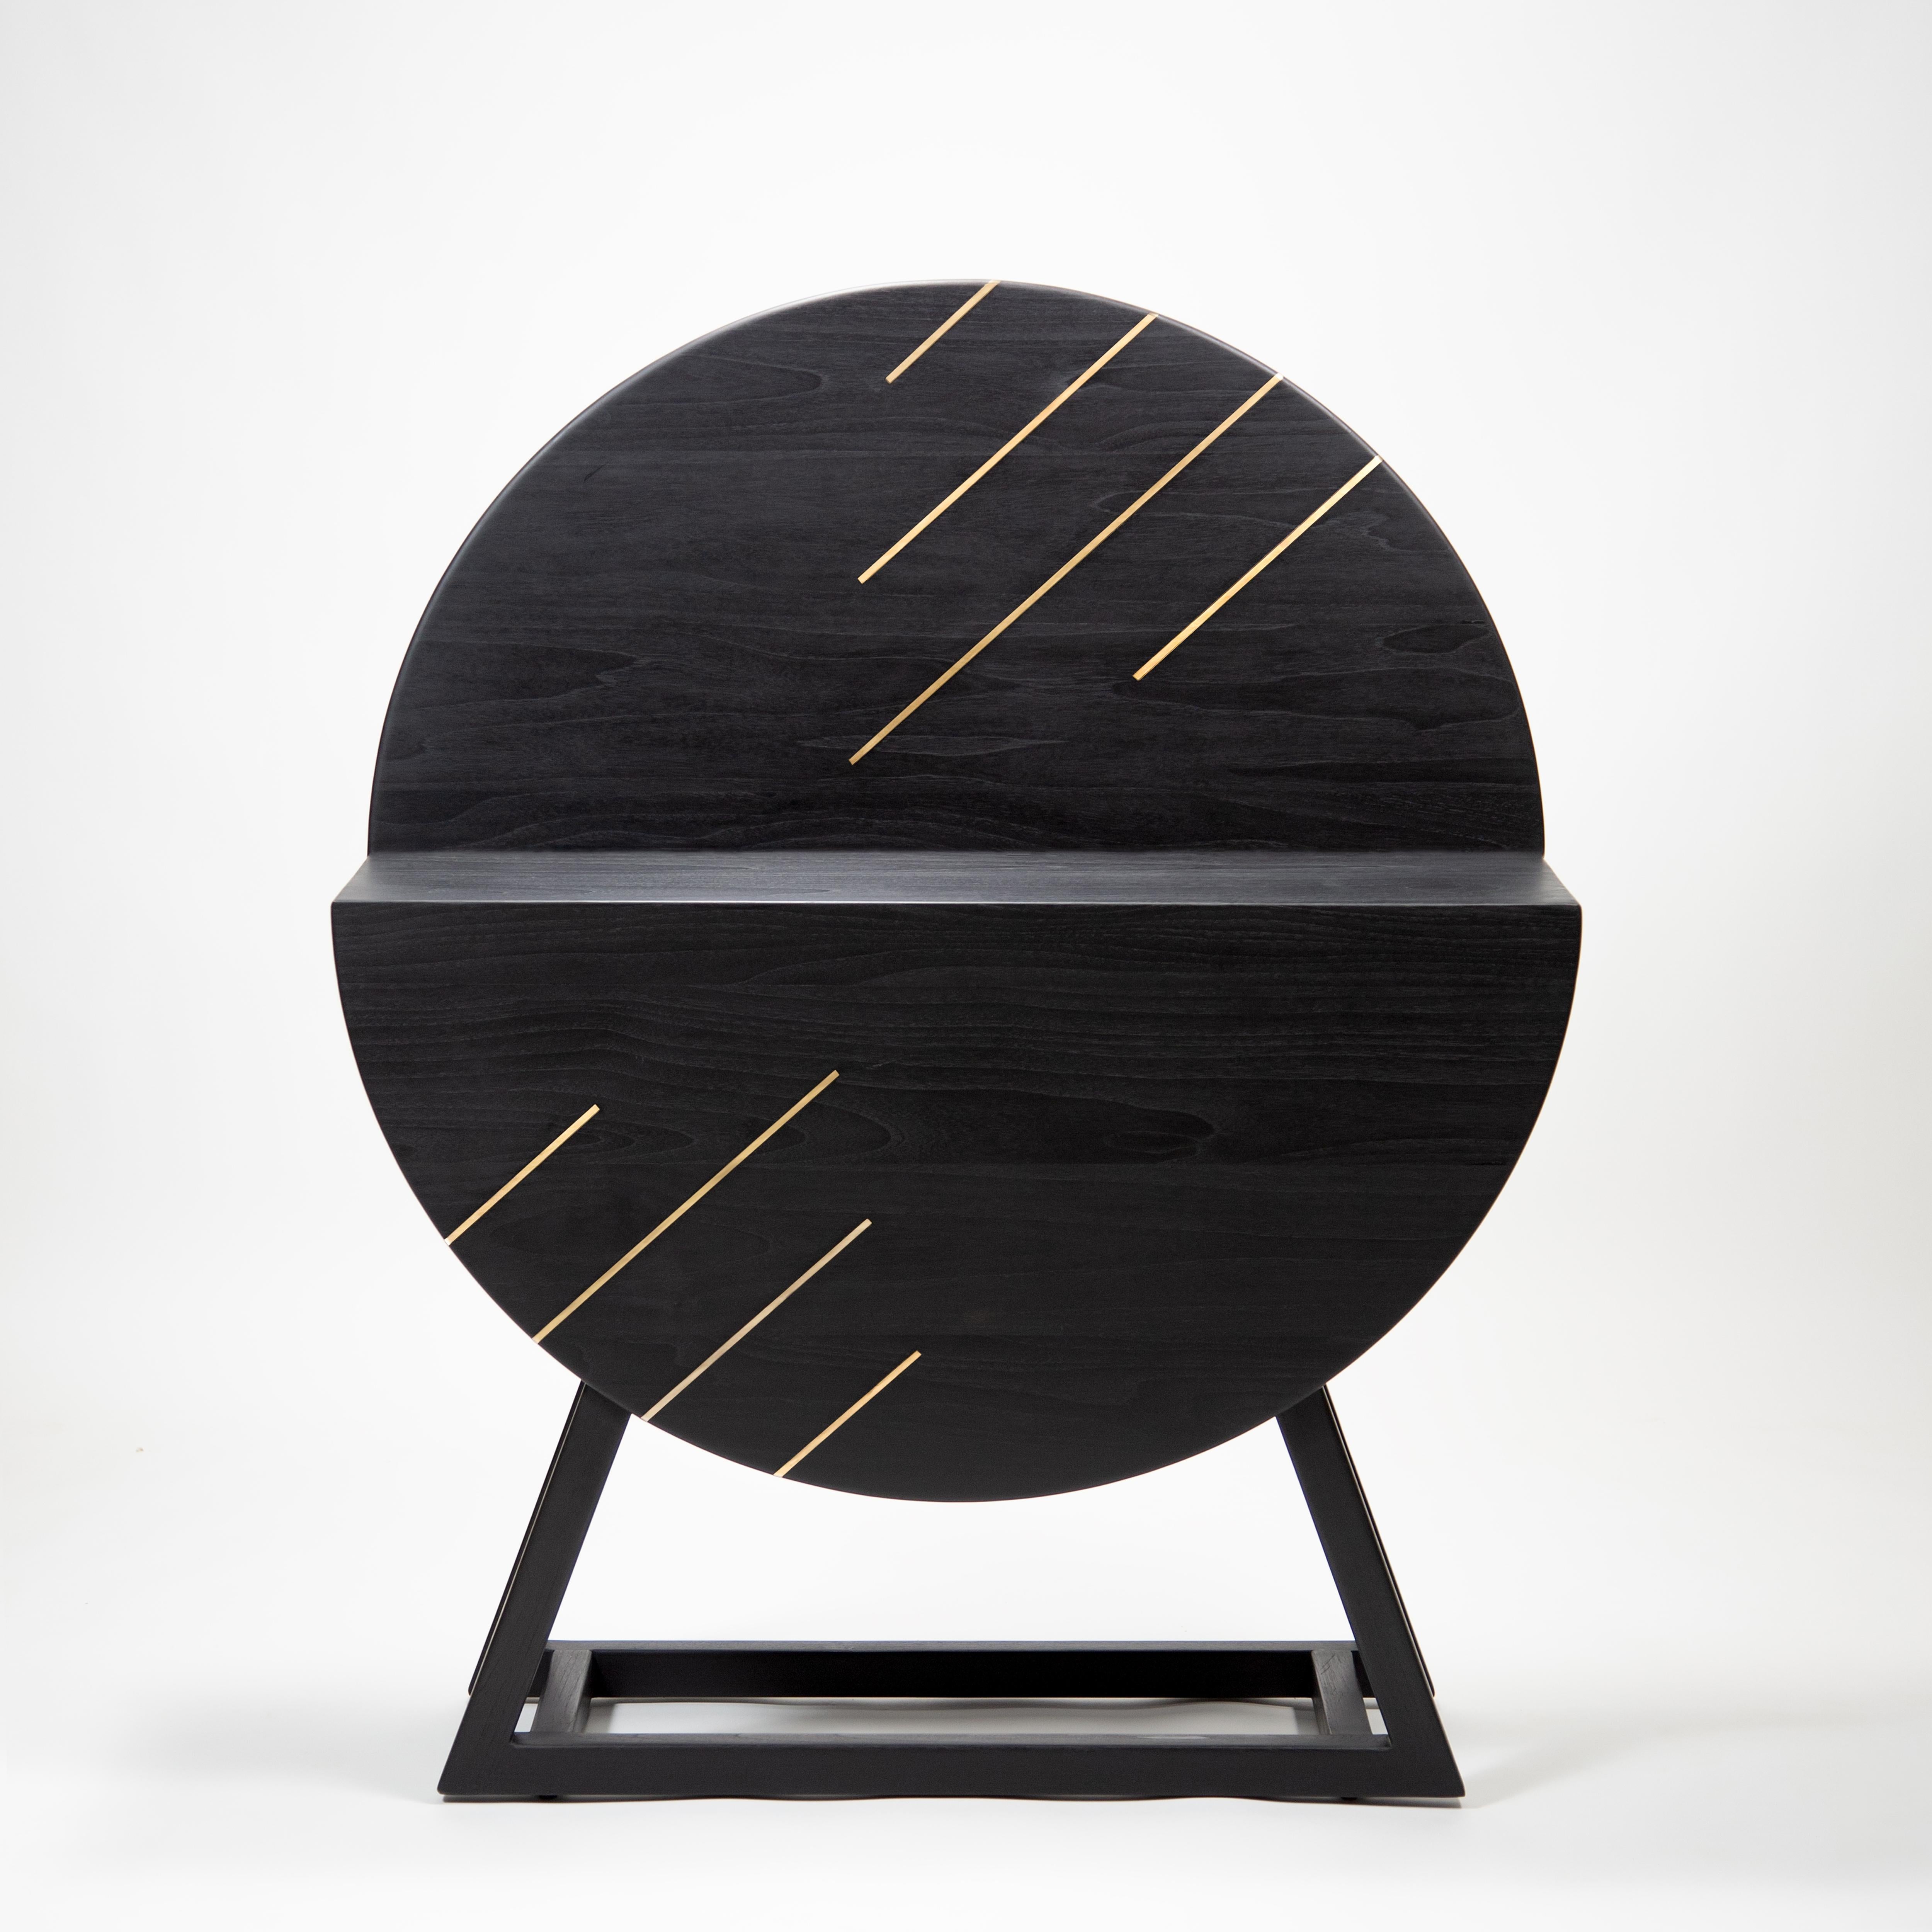 Comet Charcoal Black Console Table by Esvee Atelier
Dimensions: D 35 x W 100 x H 125 cm
Materials: Charcoal black wood.

Inspired by the mesmerising event of meteor showers, Comet is a statement console table that depicts a meteor radiation in